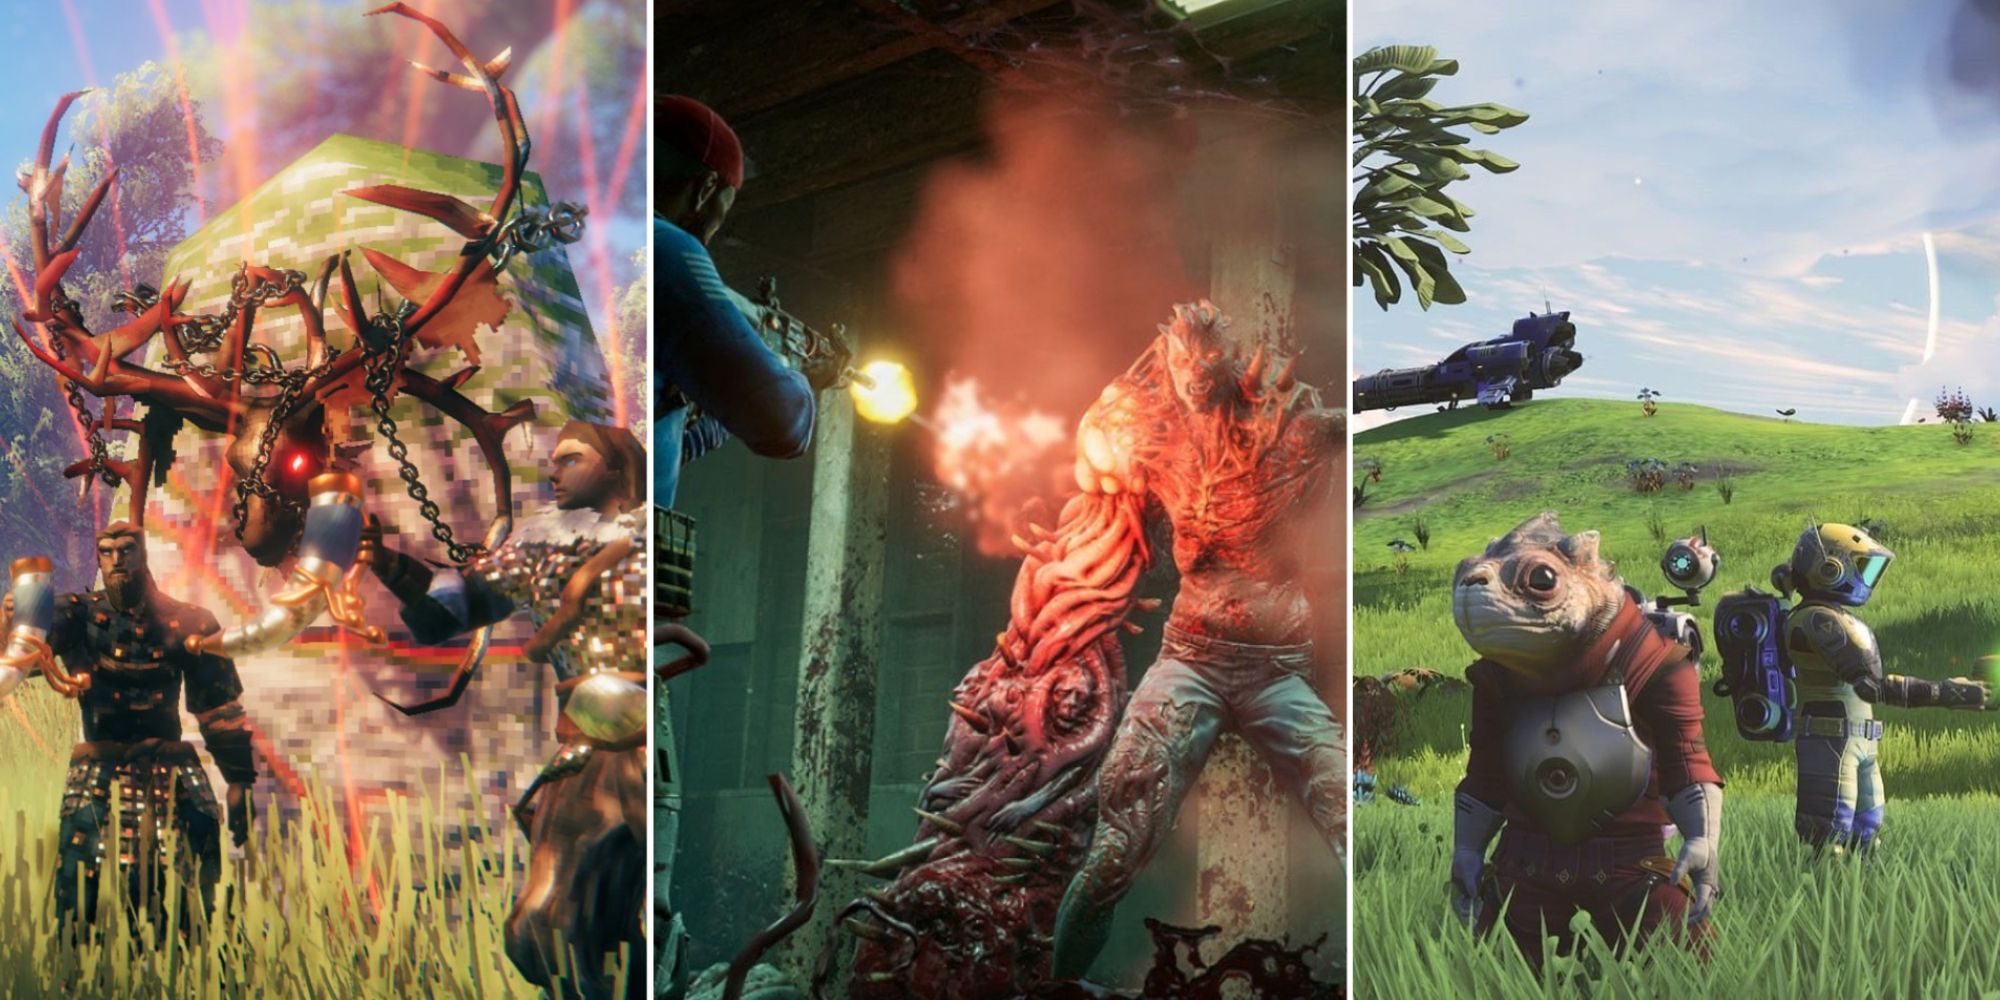 A collage of images featuring two men at a shrine, a man shooting an infected zombie and an alien and other figure on a grassy planet